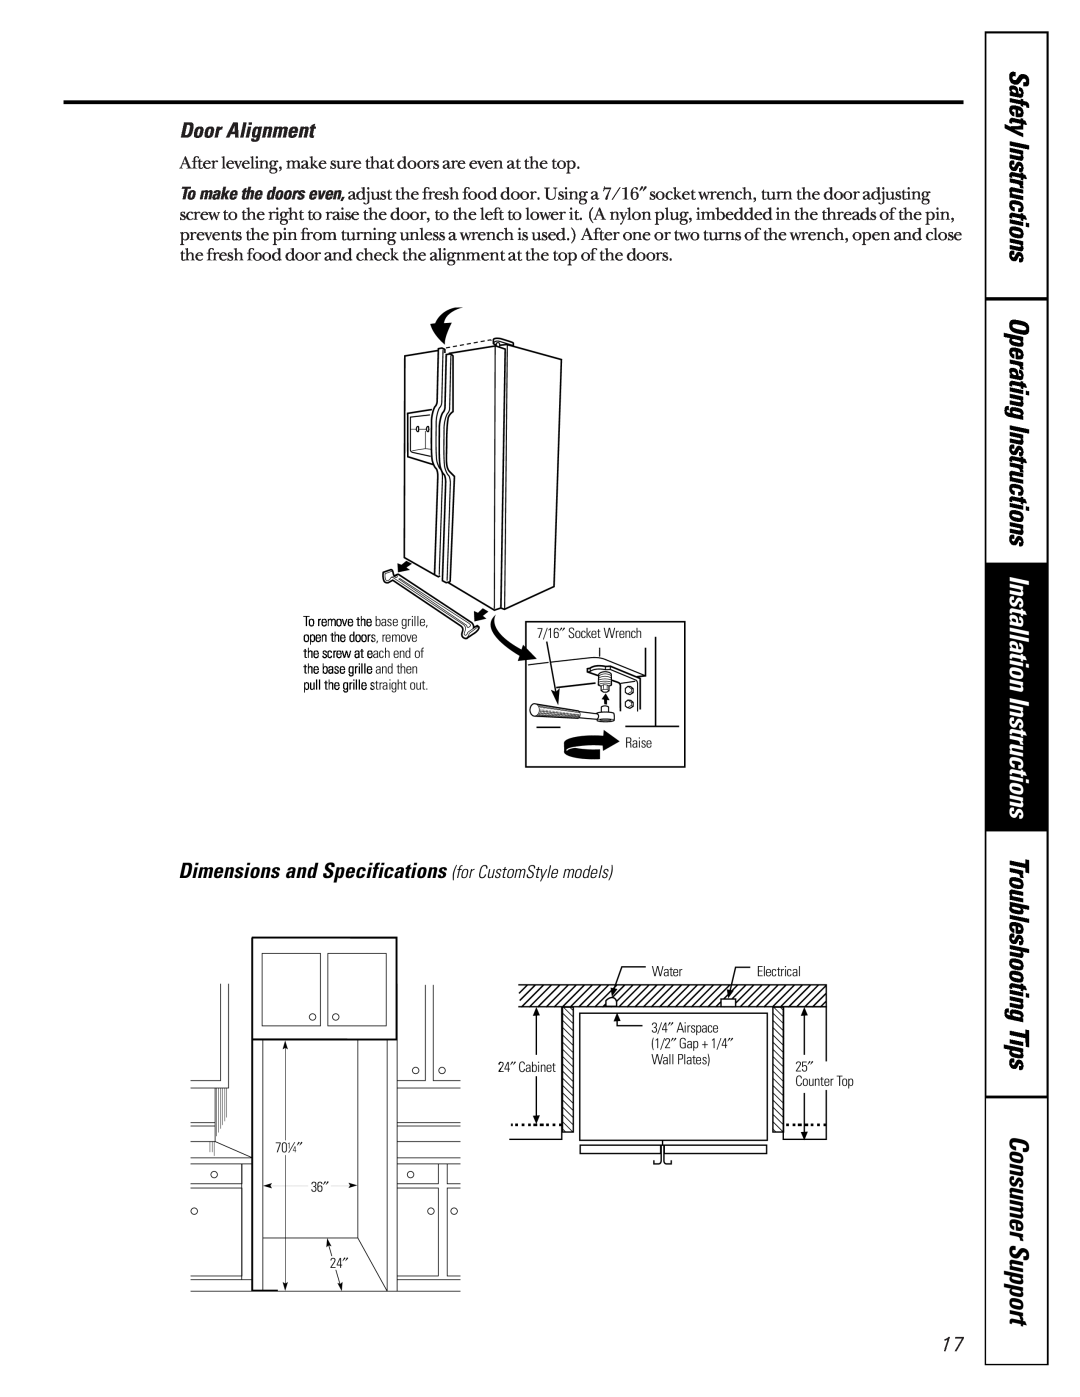 GE 21 Safety Instructions Operating Instructions, Tips Consumer, Support, Installation Instructions, Door Alignment 